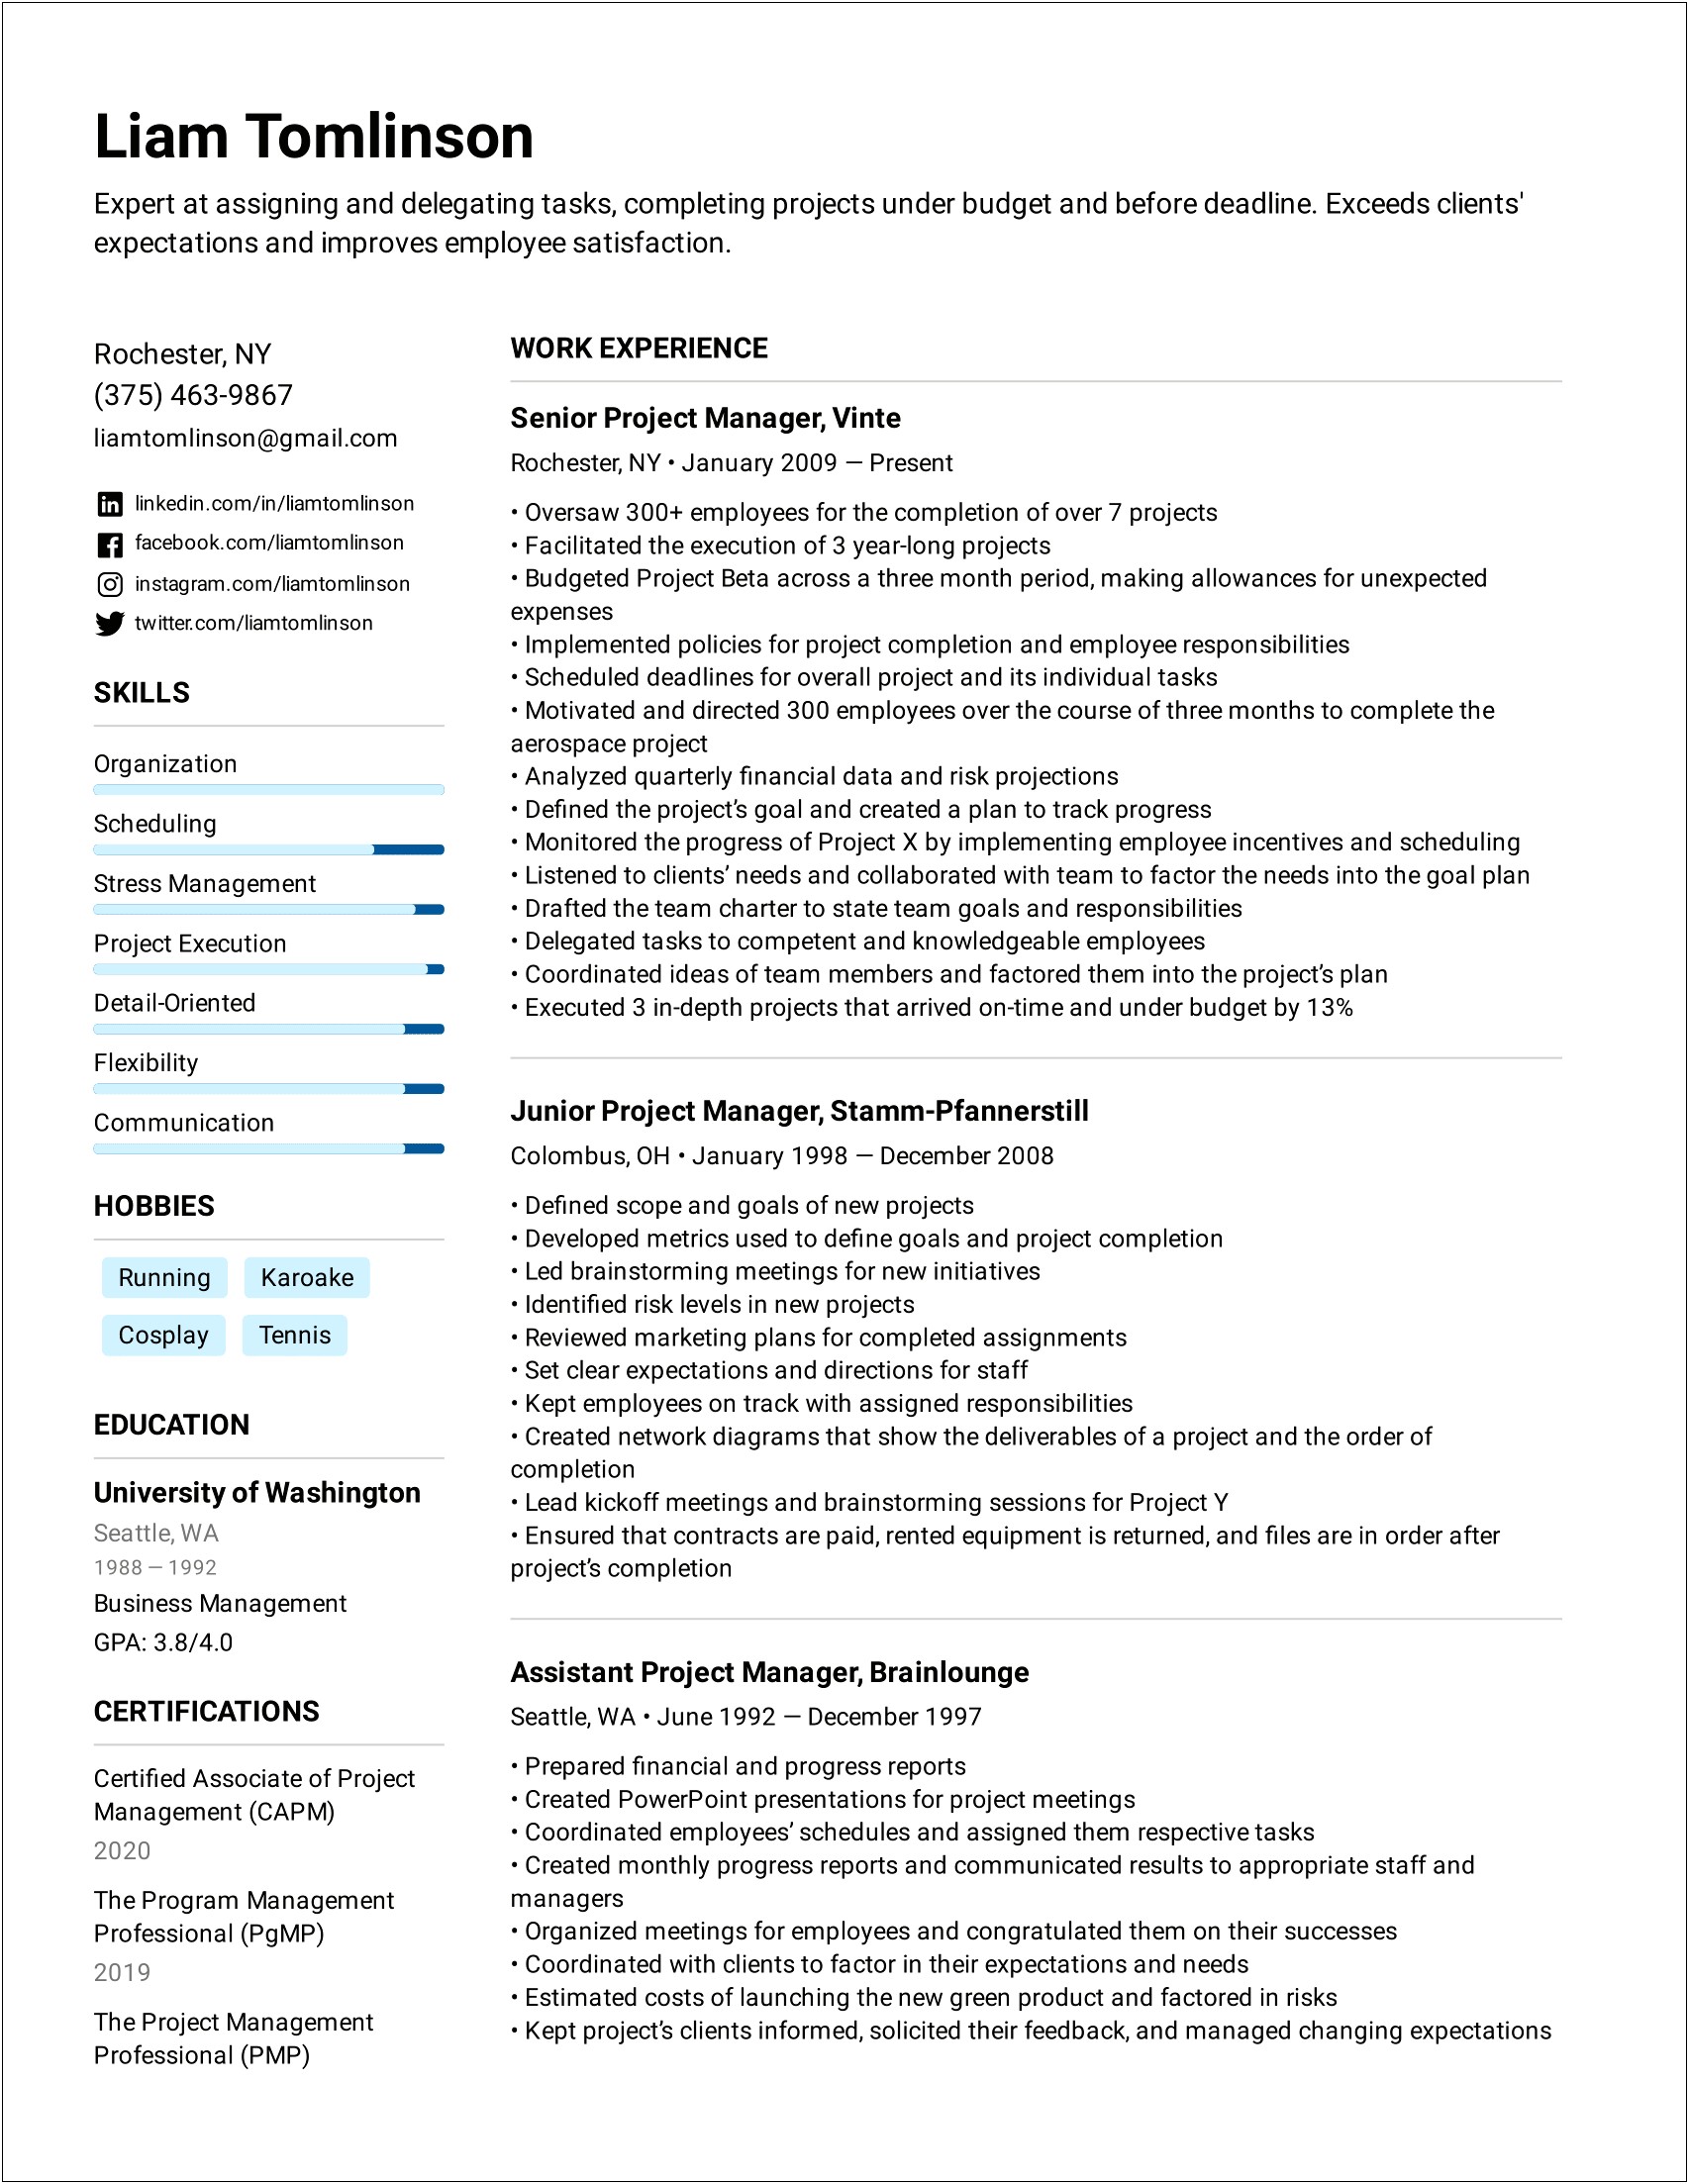 Resume Objective Statement Examples For Students